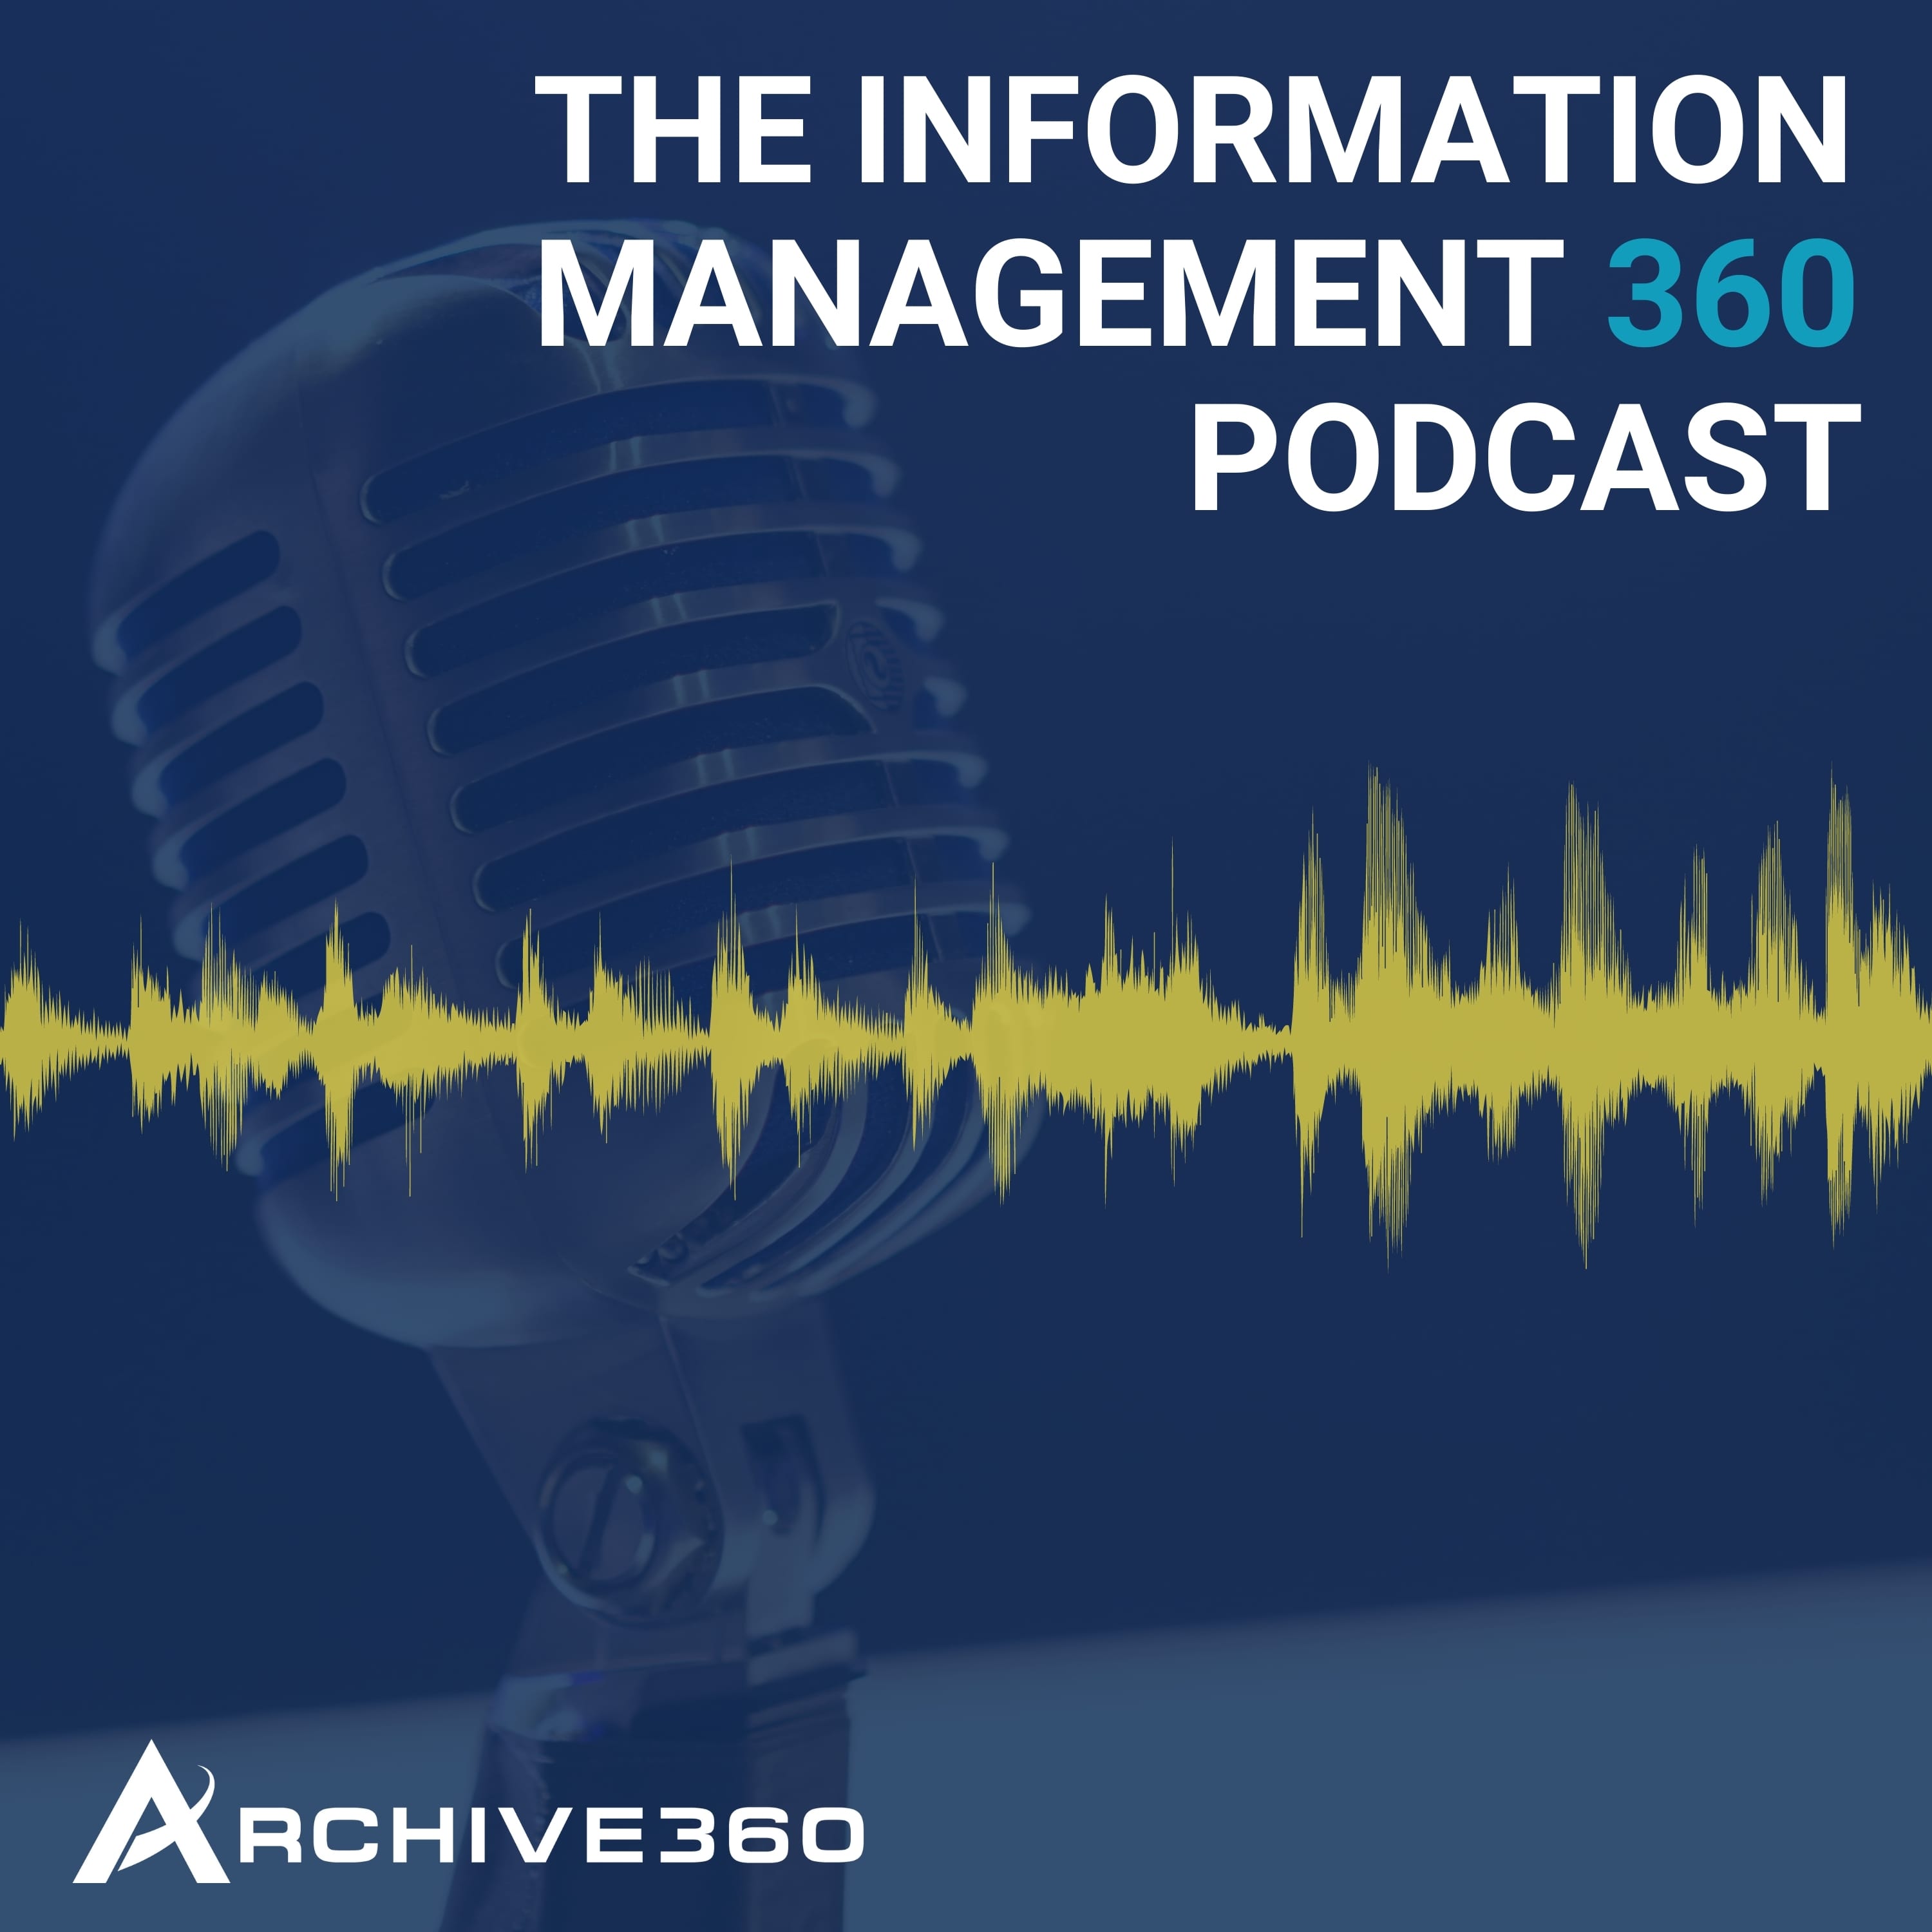 The Information Management 360 Podcast